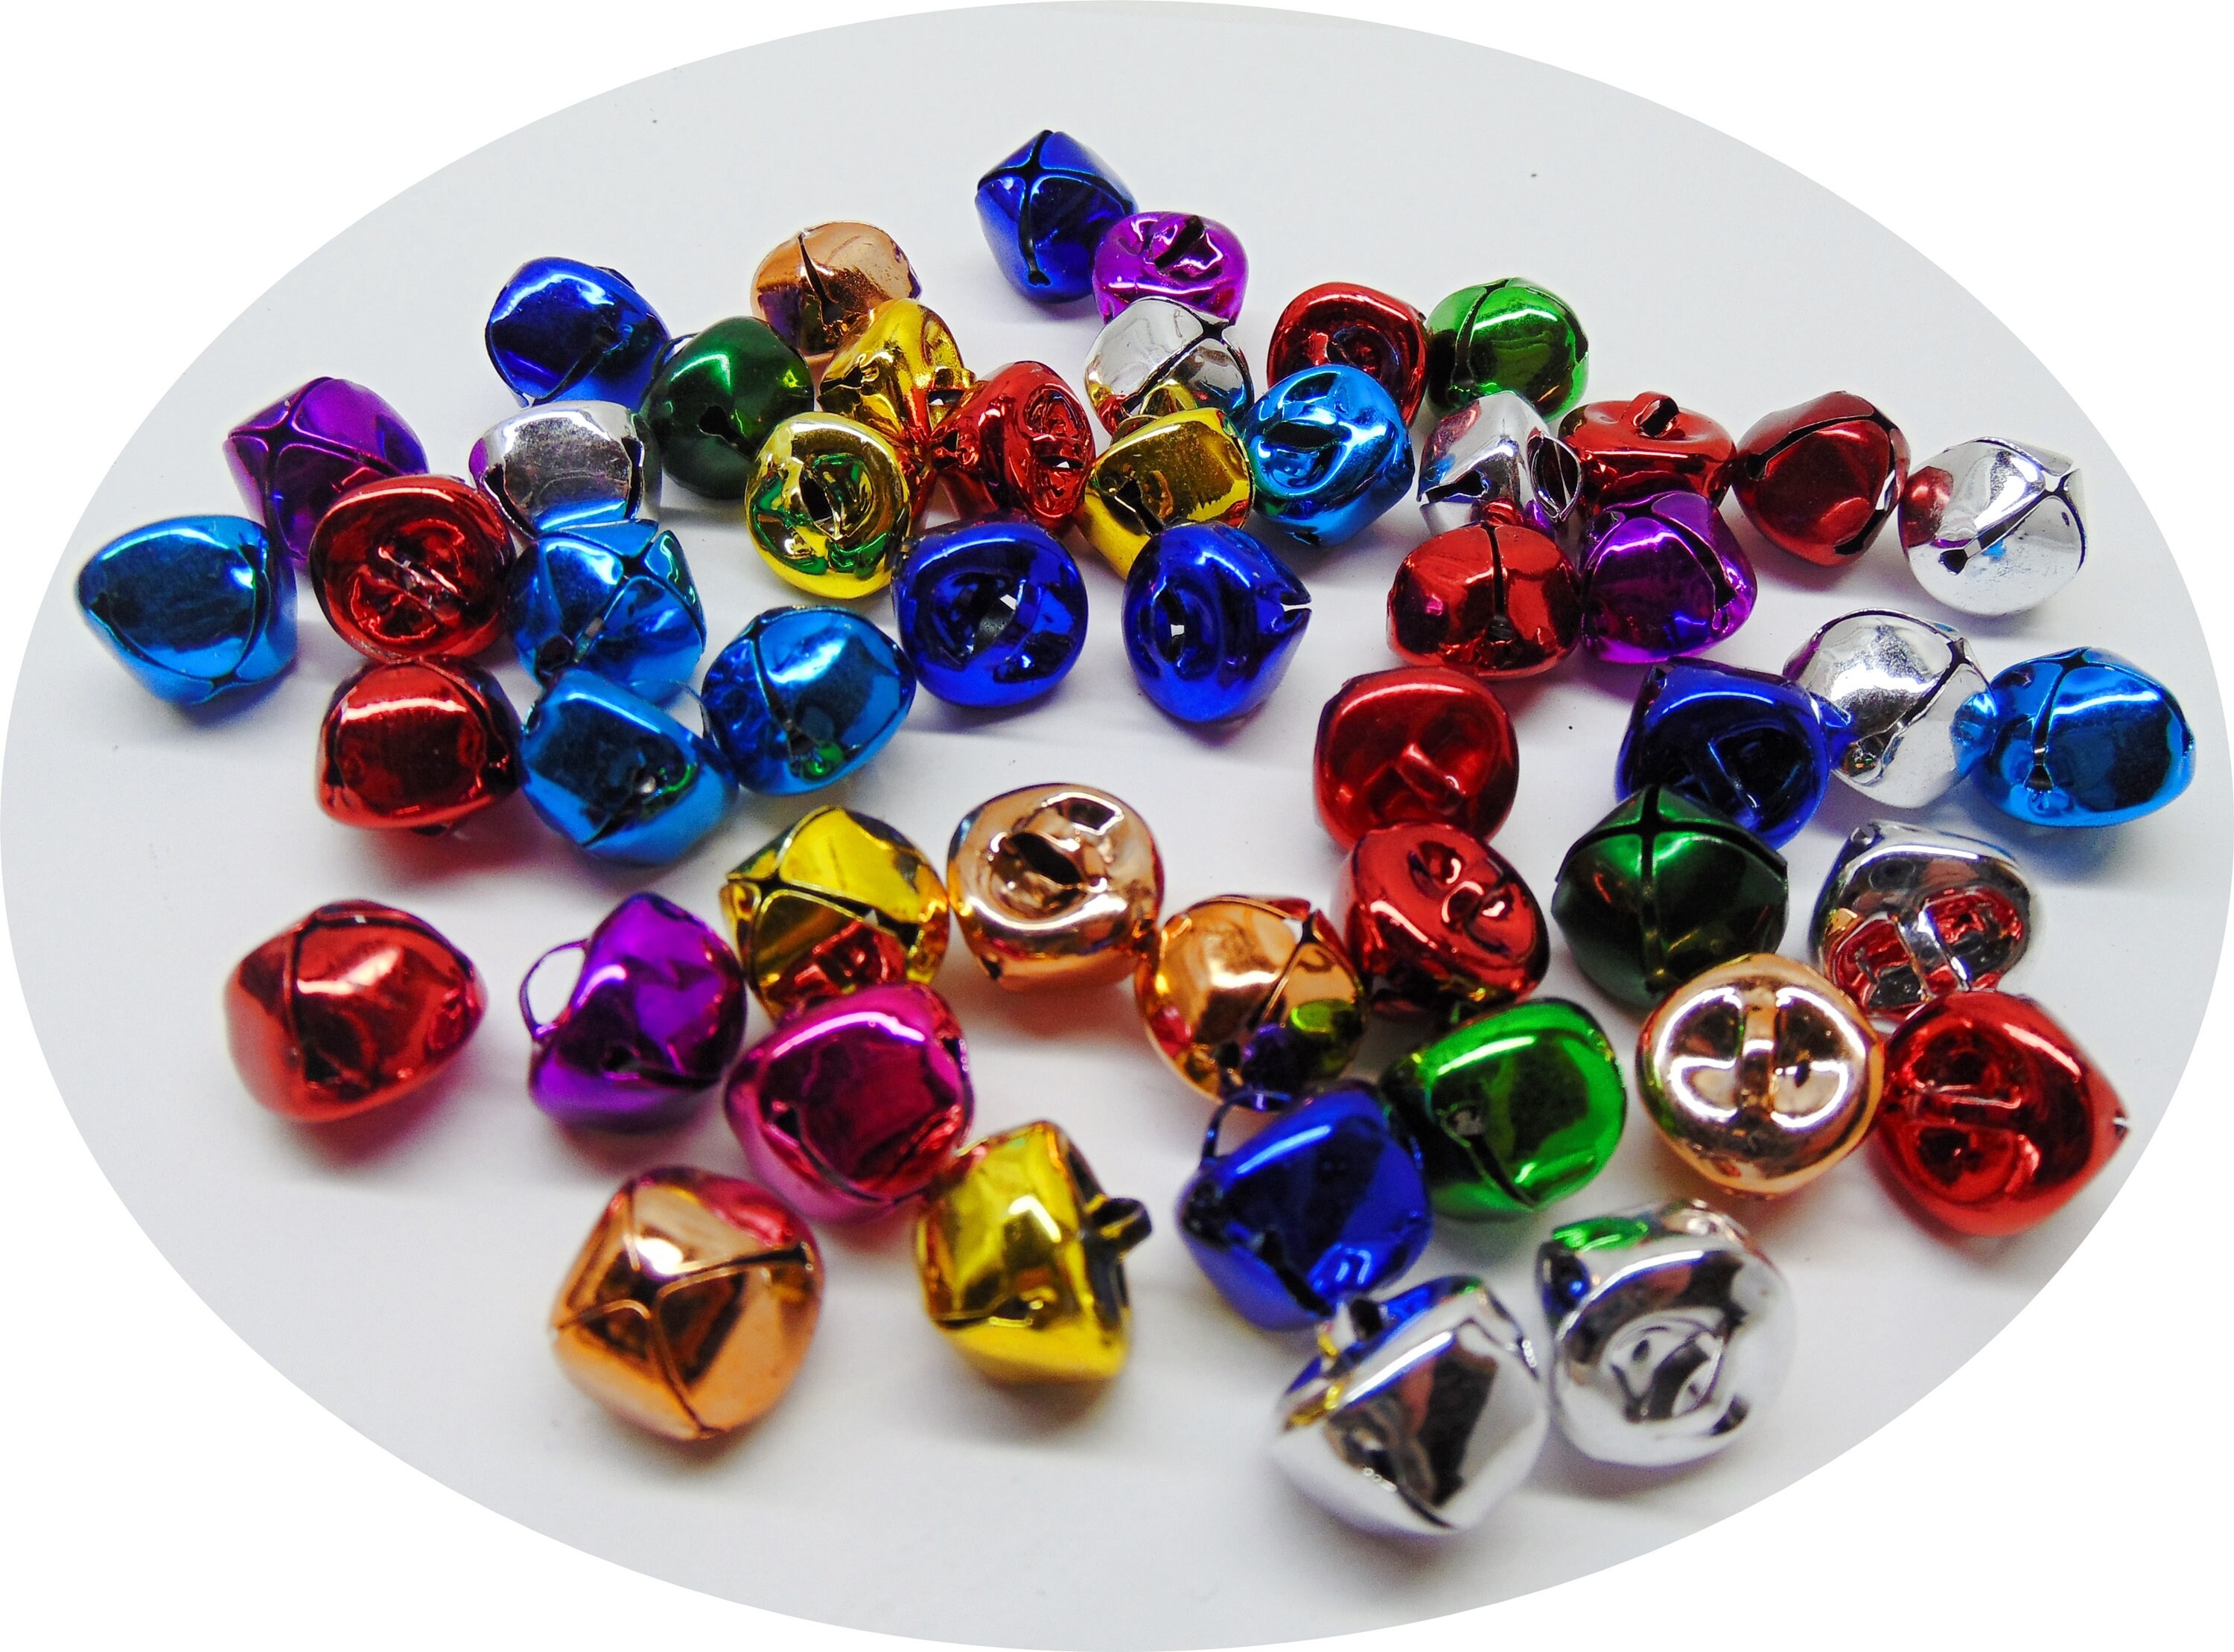 Package of 200 Miniature Assorted Holiday Colored Jingle Bells